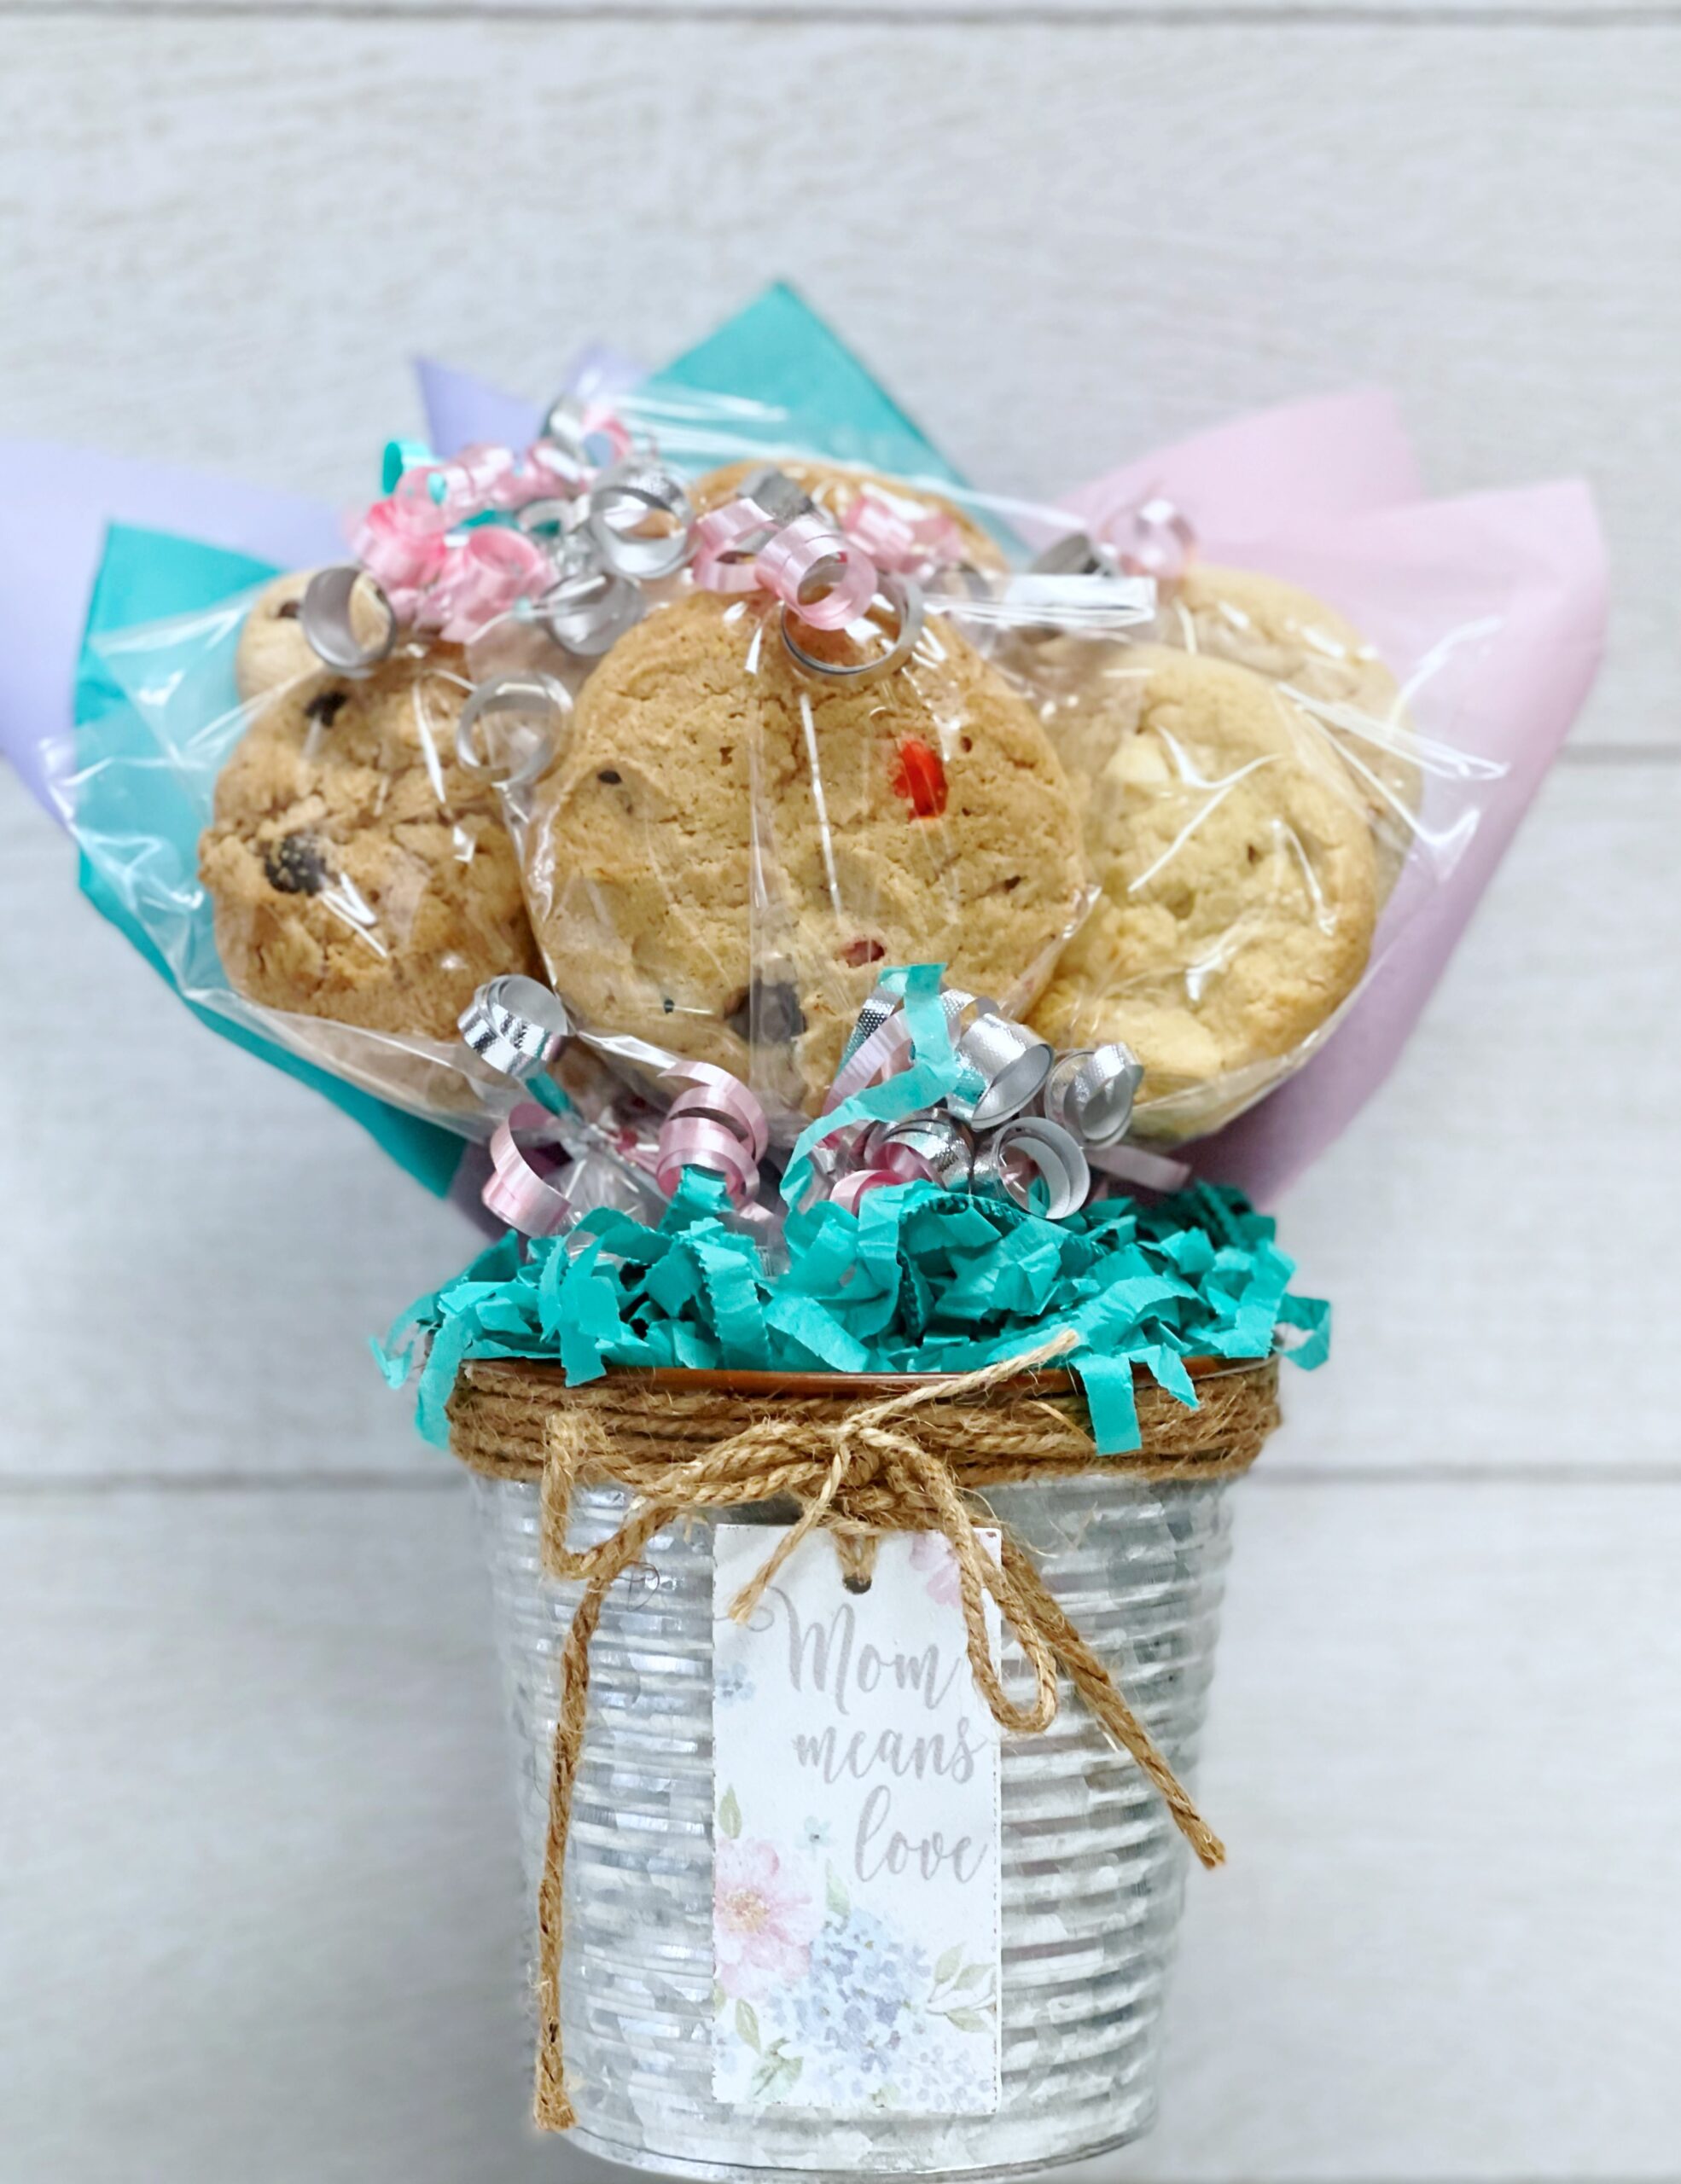 How to Make a Cookie Bouquet